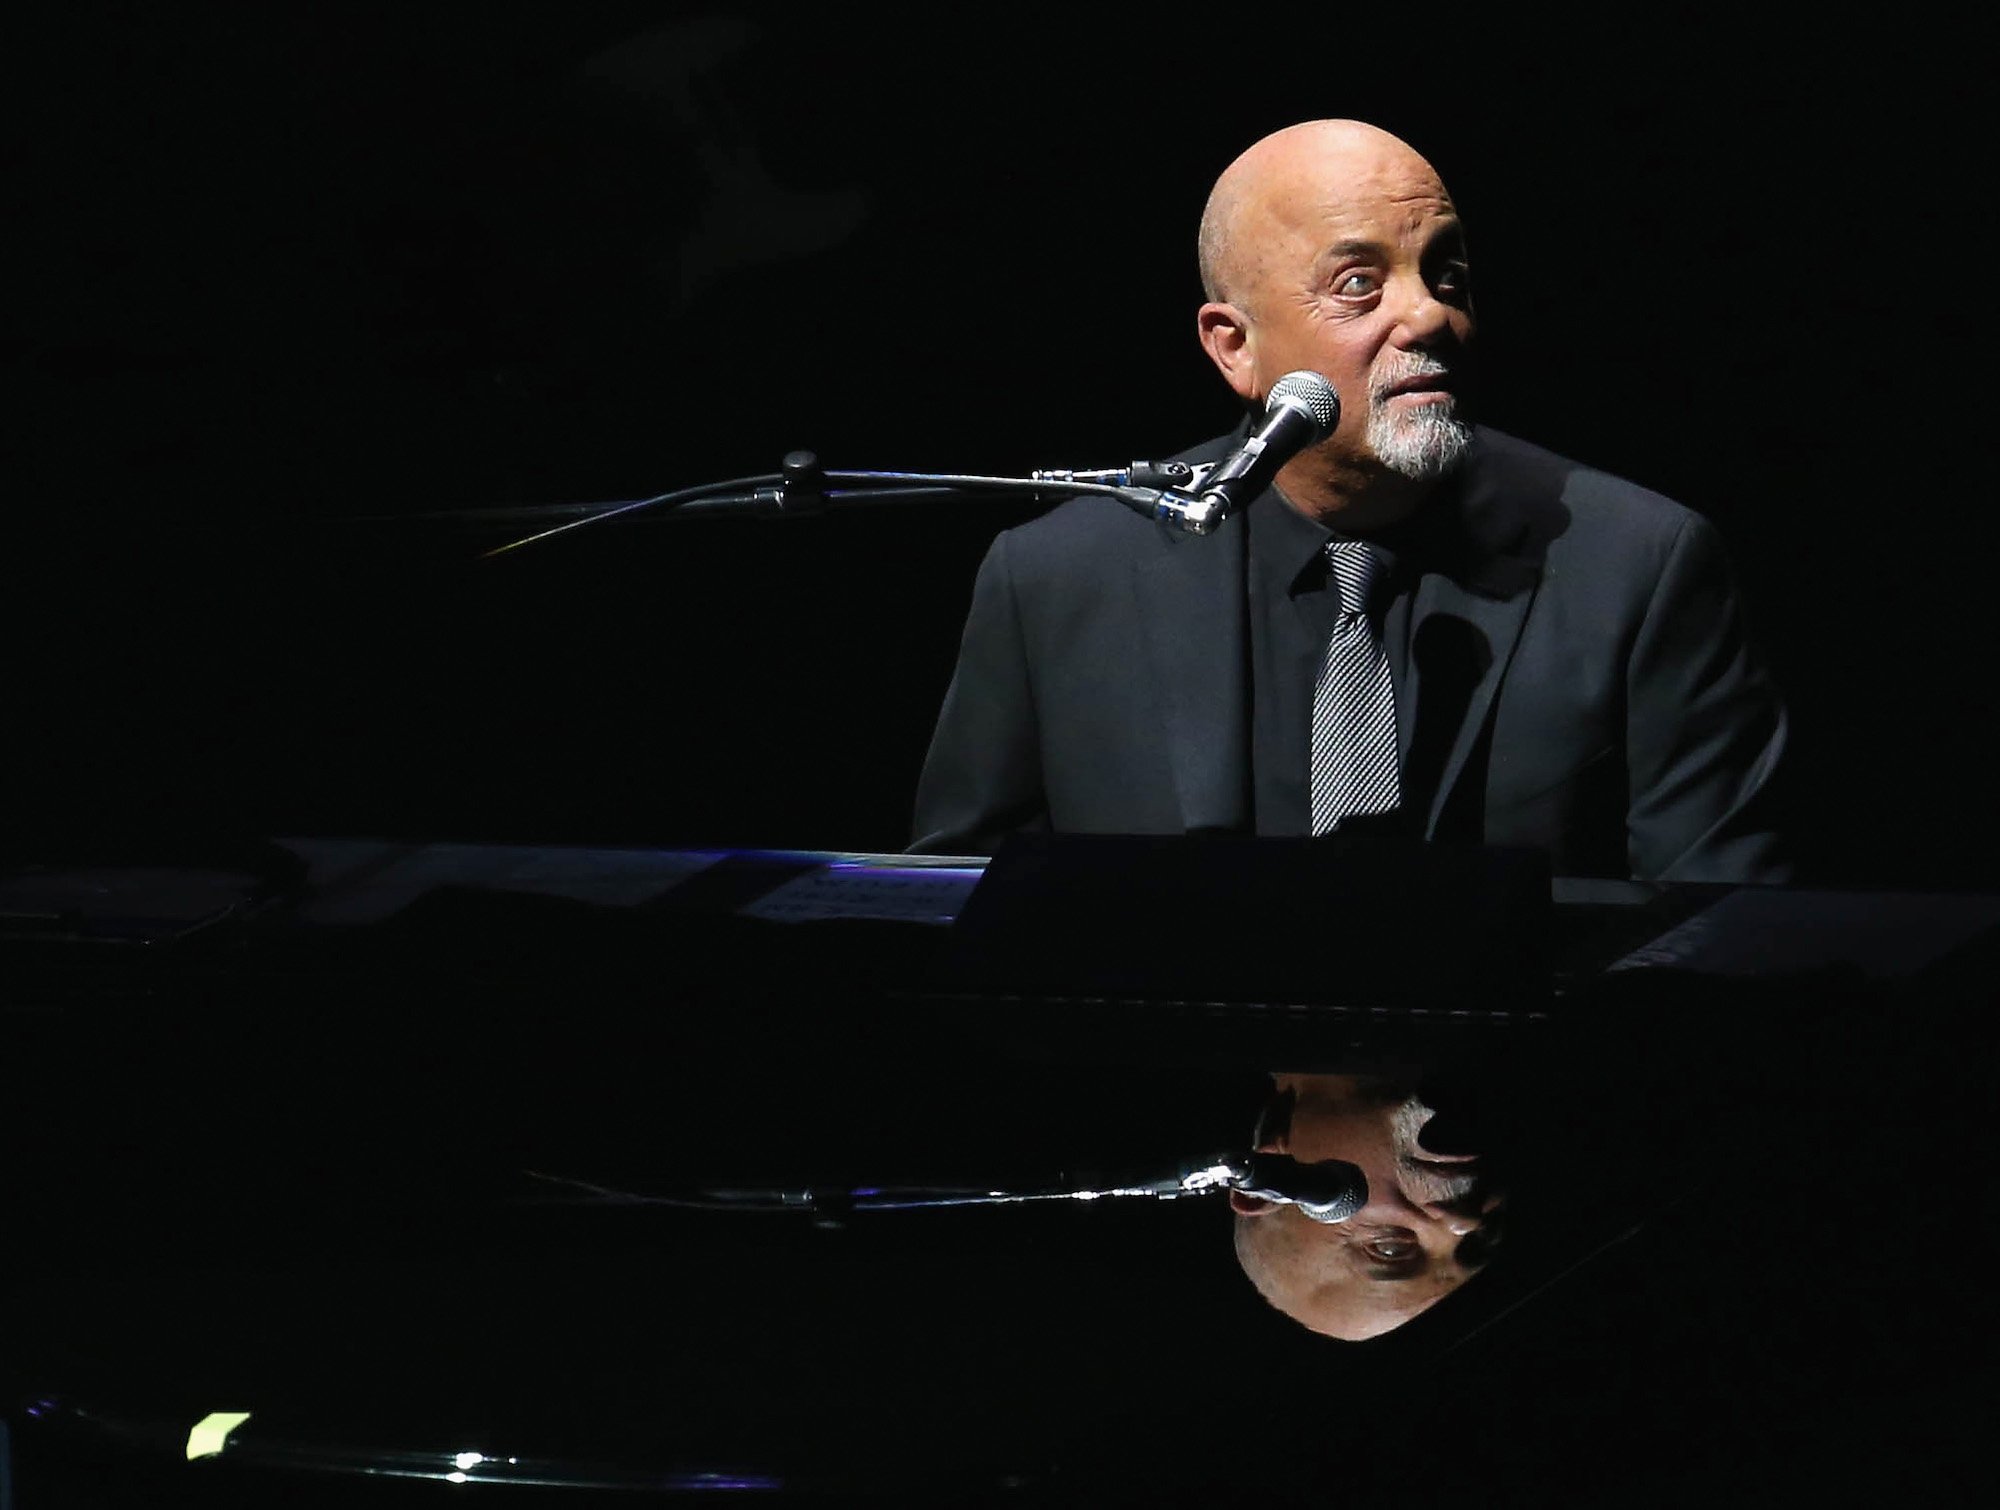 Billy Joel’s 1st Wife Inspired ‘Just the Way You Are’ But She Only Cared About the Royalties